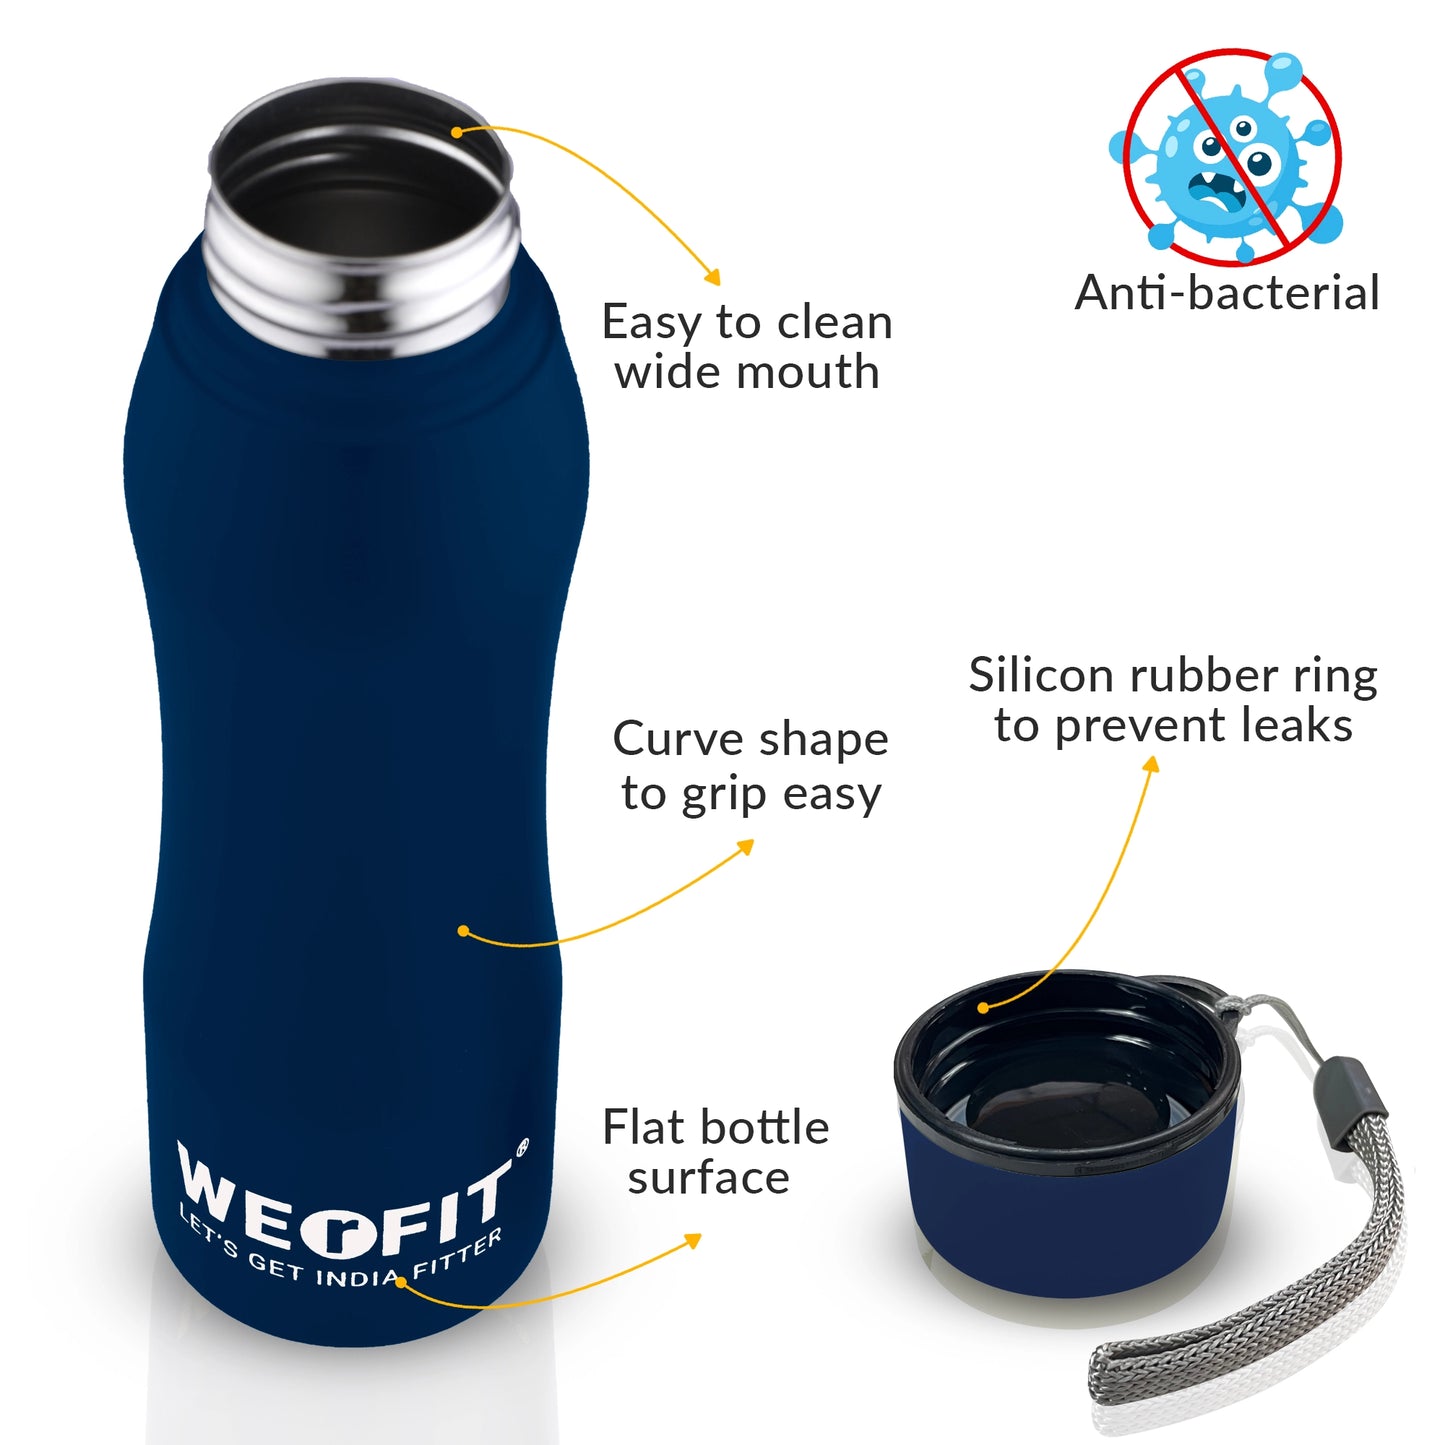 WErFIT Stainless Steel Water Bottle for Gym Park Cycling Yoga Office School Sports 900 ml Shaker  (Pack of 1, Blue, Steel)